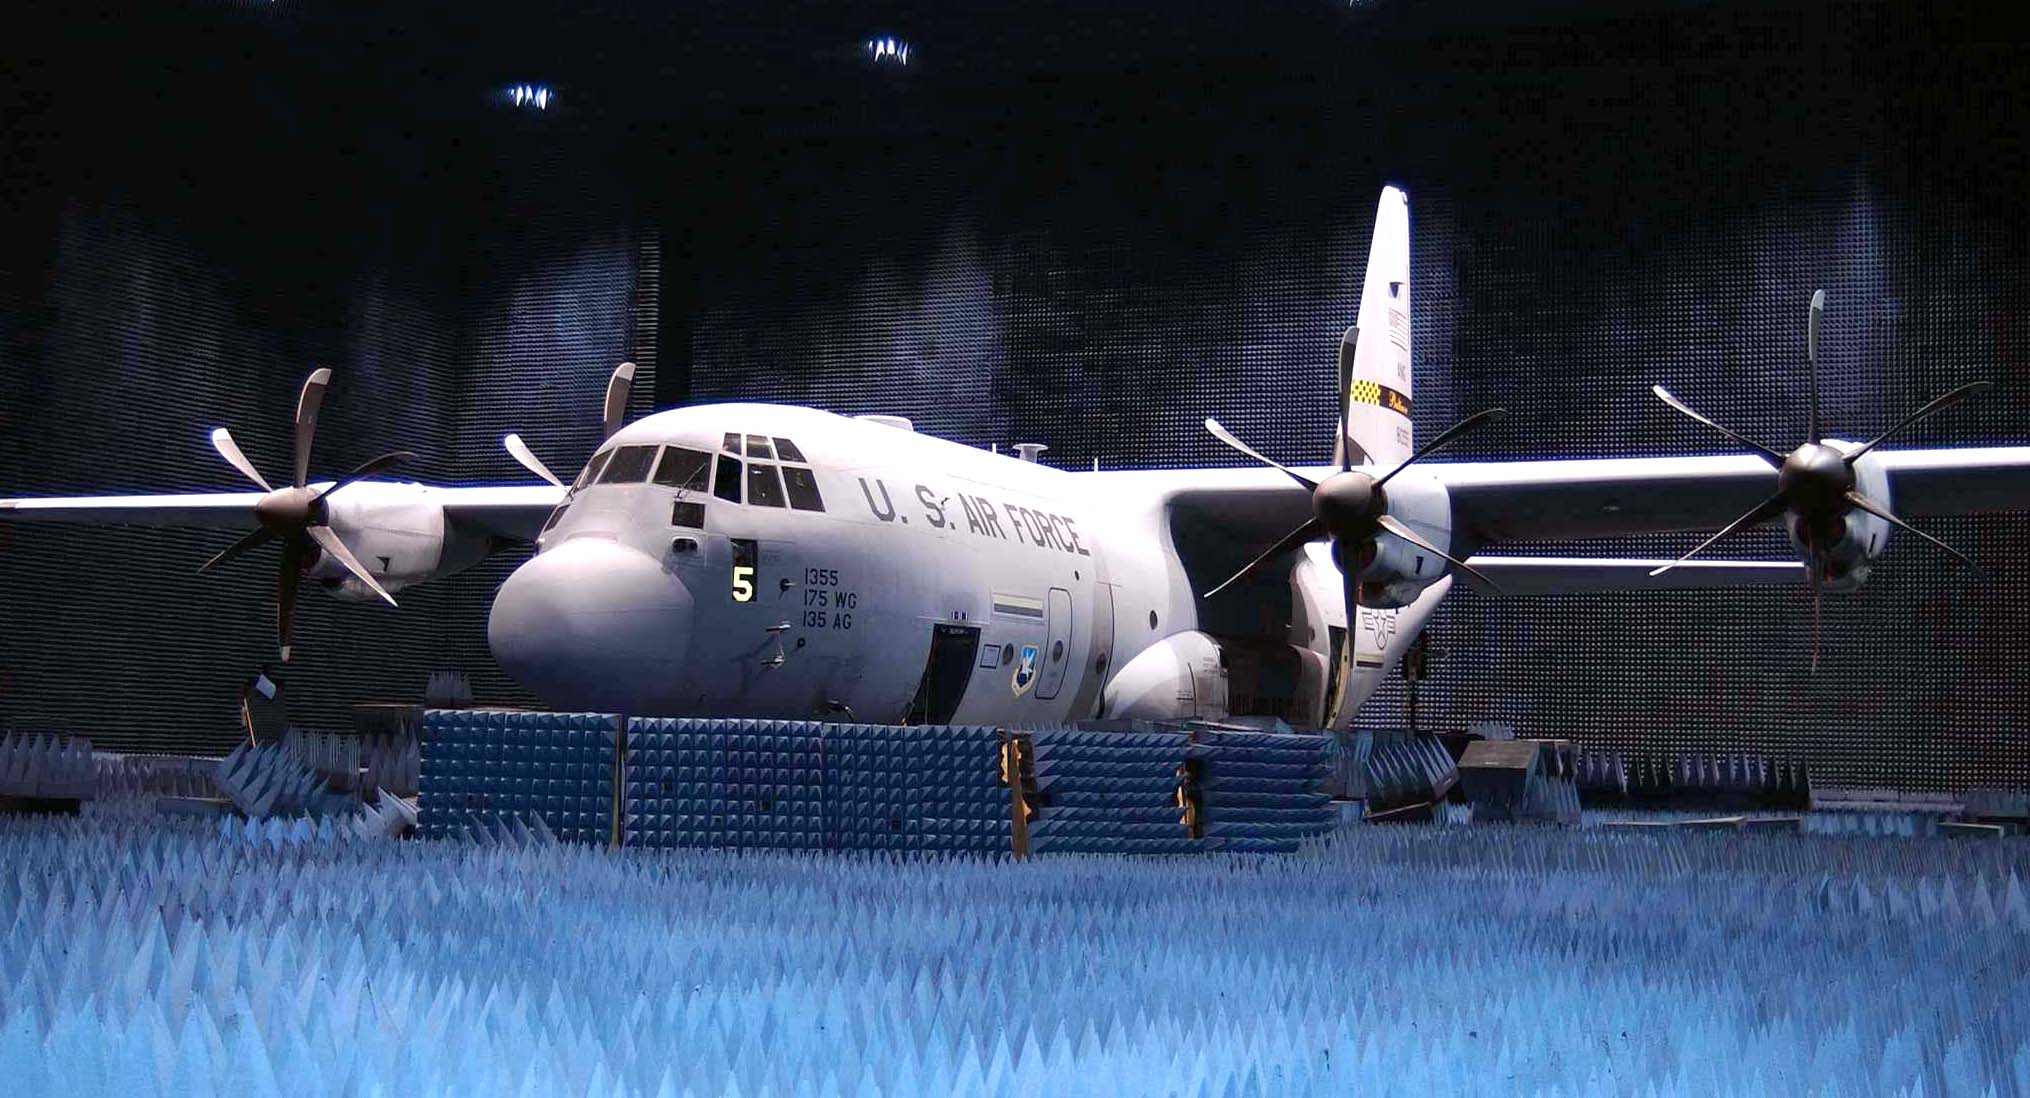 C-130 In Anechoic Chamber.